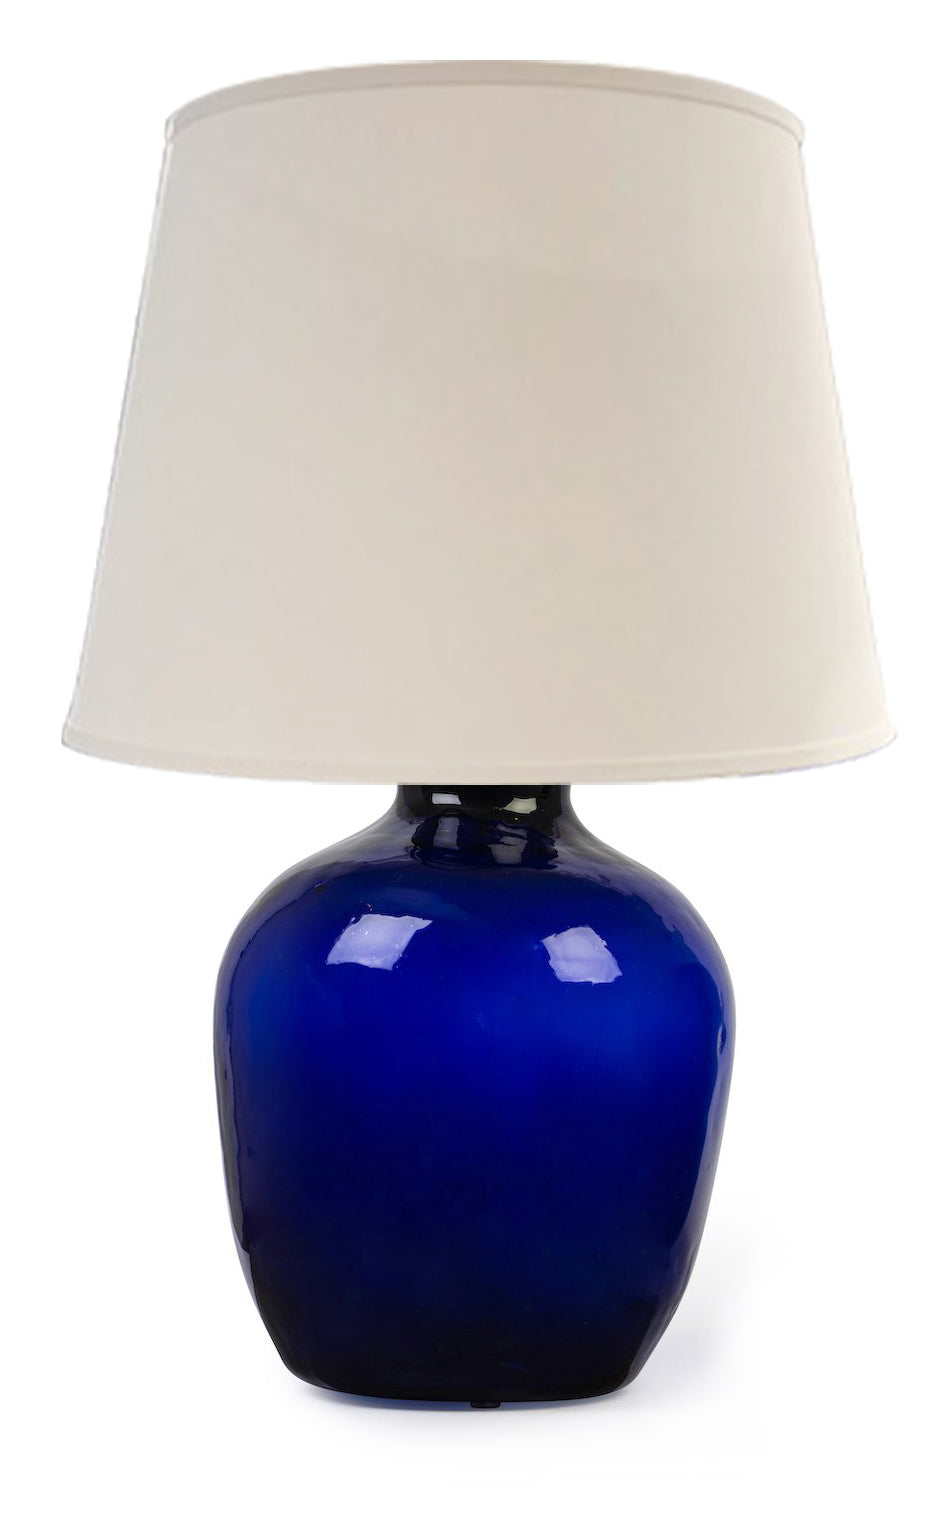 SOLD An impressive hand blown cobalt-blue bottle glass table lamp, French 19th Century